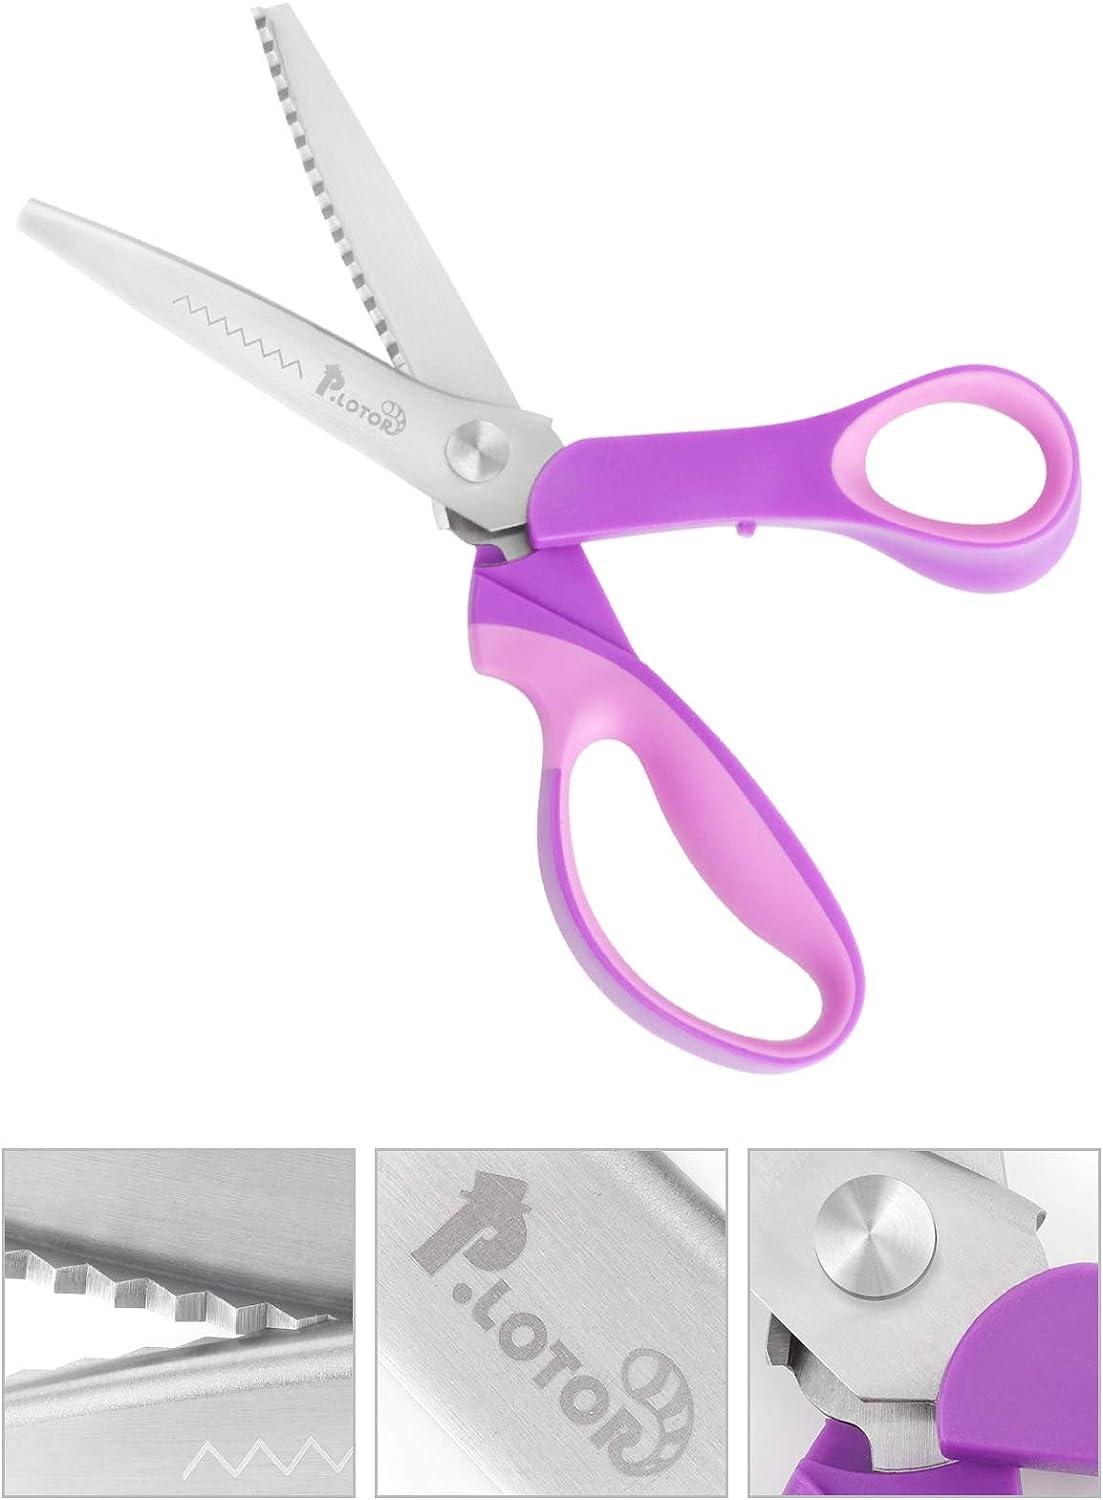 UCEC Pinking Shears for Fabric, Strong & Sharpe Serrated Soft Grip Handle  9.3 Inch Sewing Pinking Shears, Zig Zag Cut Scissors for Dressmaking, Sewing  and Arts and Crafts 